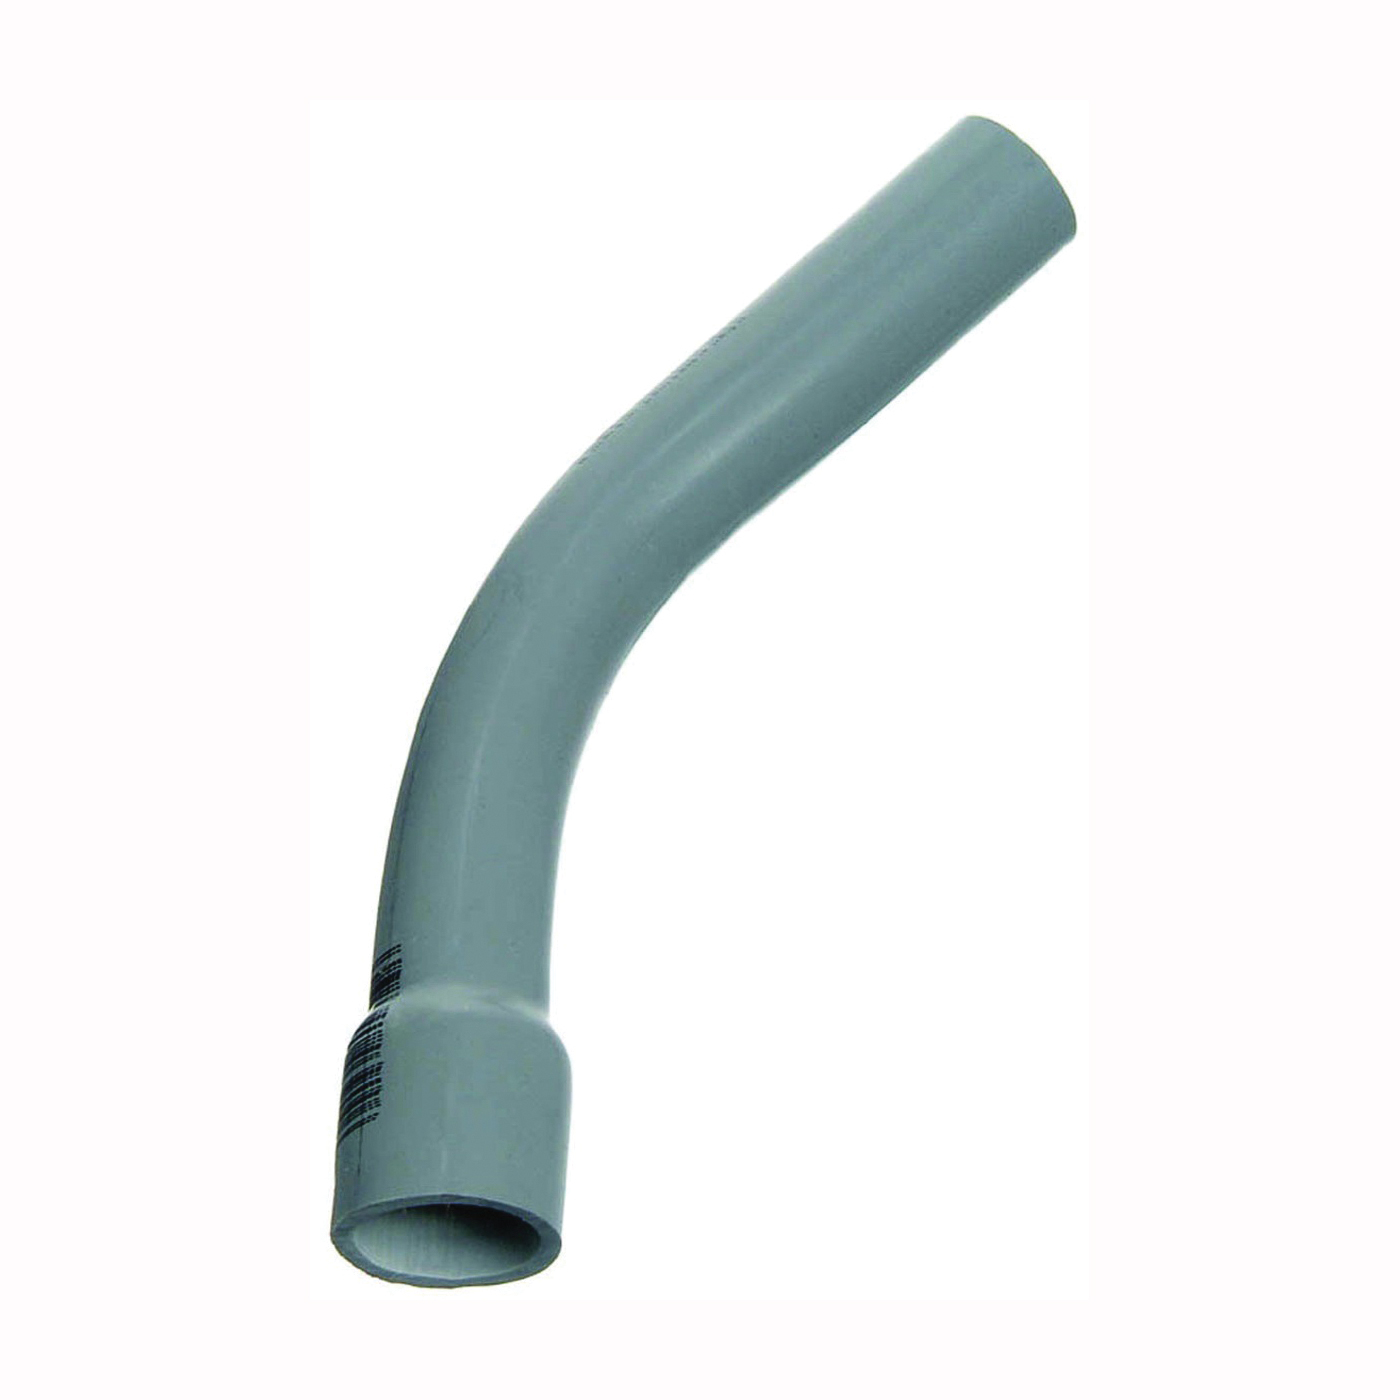 Carlon UA7AHB-CAR Elbow, 1-1/2 in Trade Size, 45 deg Angle, SCH 40 Schedule Rating, PVC, Bell End, Gray